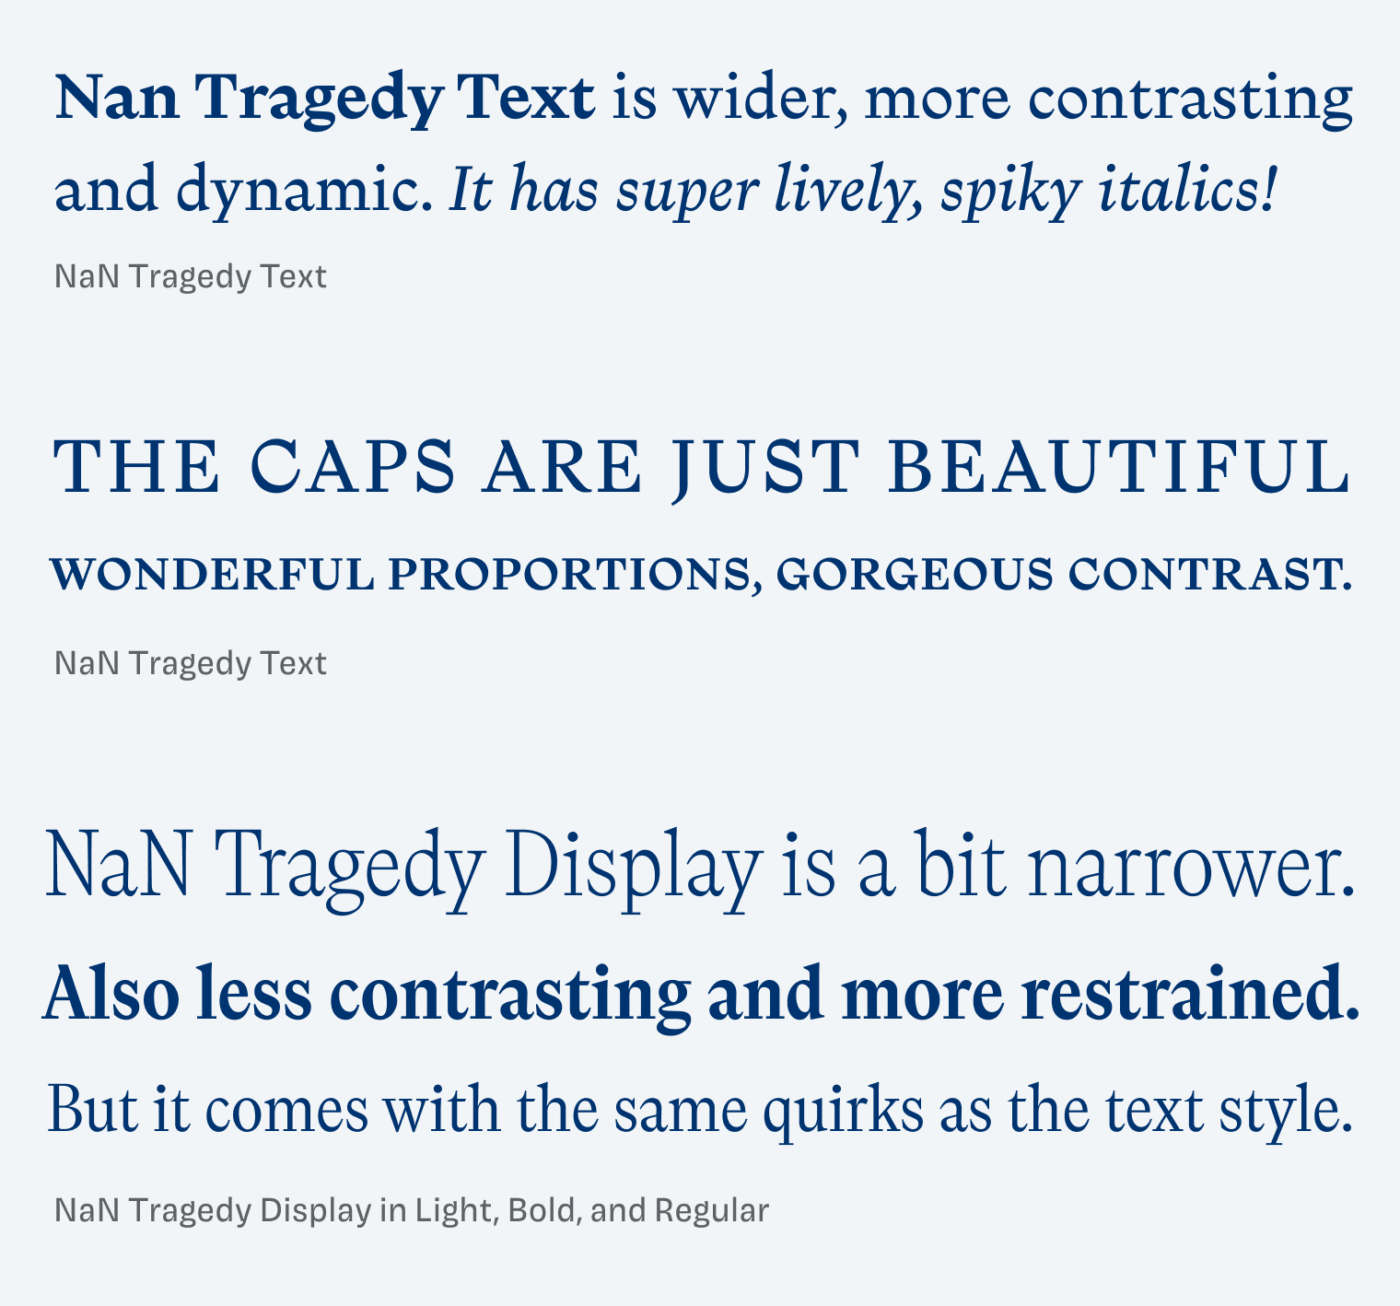 Nan Tragedy Text is wider, more contrasting and dynamic. It has super lively, spiky italics! The caps are just beautiful. Wonderful proportions, Gorgeous Contrast. NaN Tragedy Display is a bit narrower. Also less contrasting and more restrained. But it comes with the same quirks as the text style.